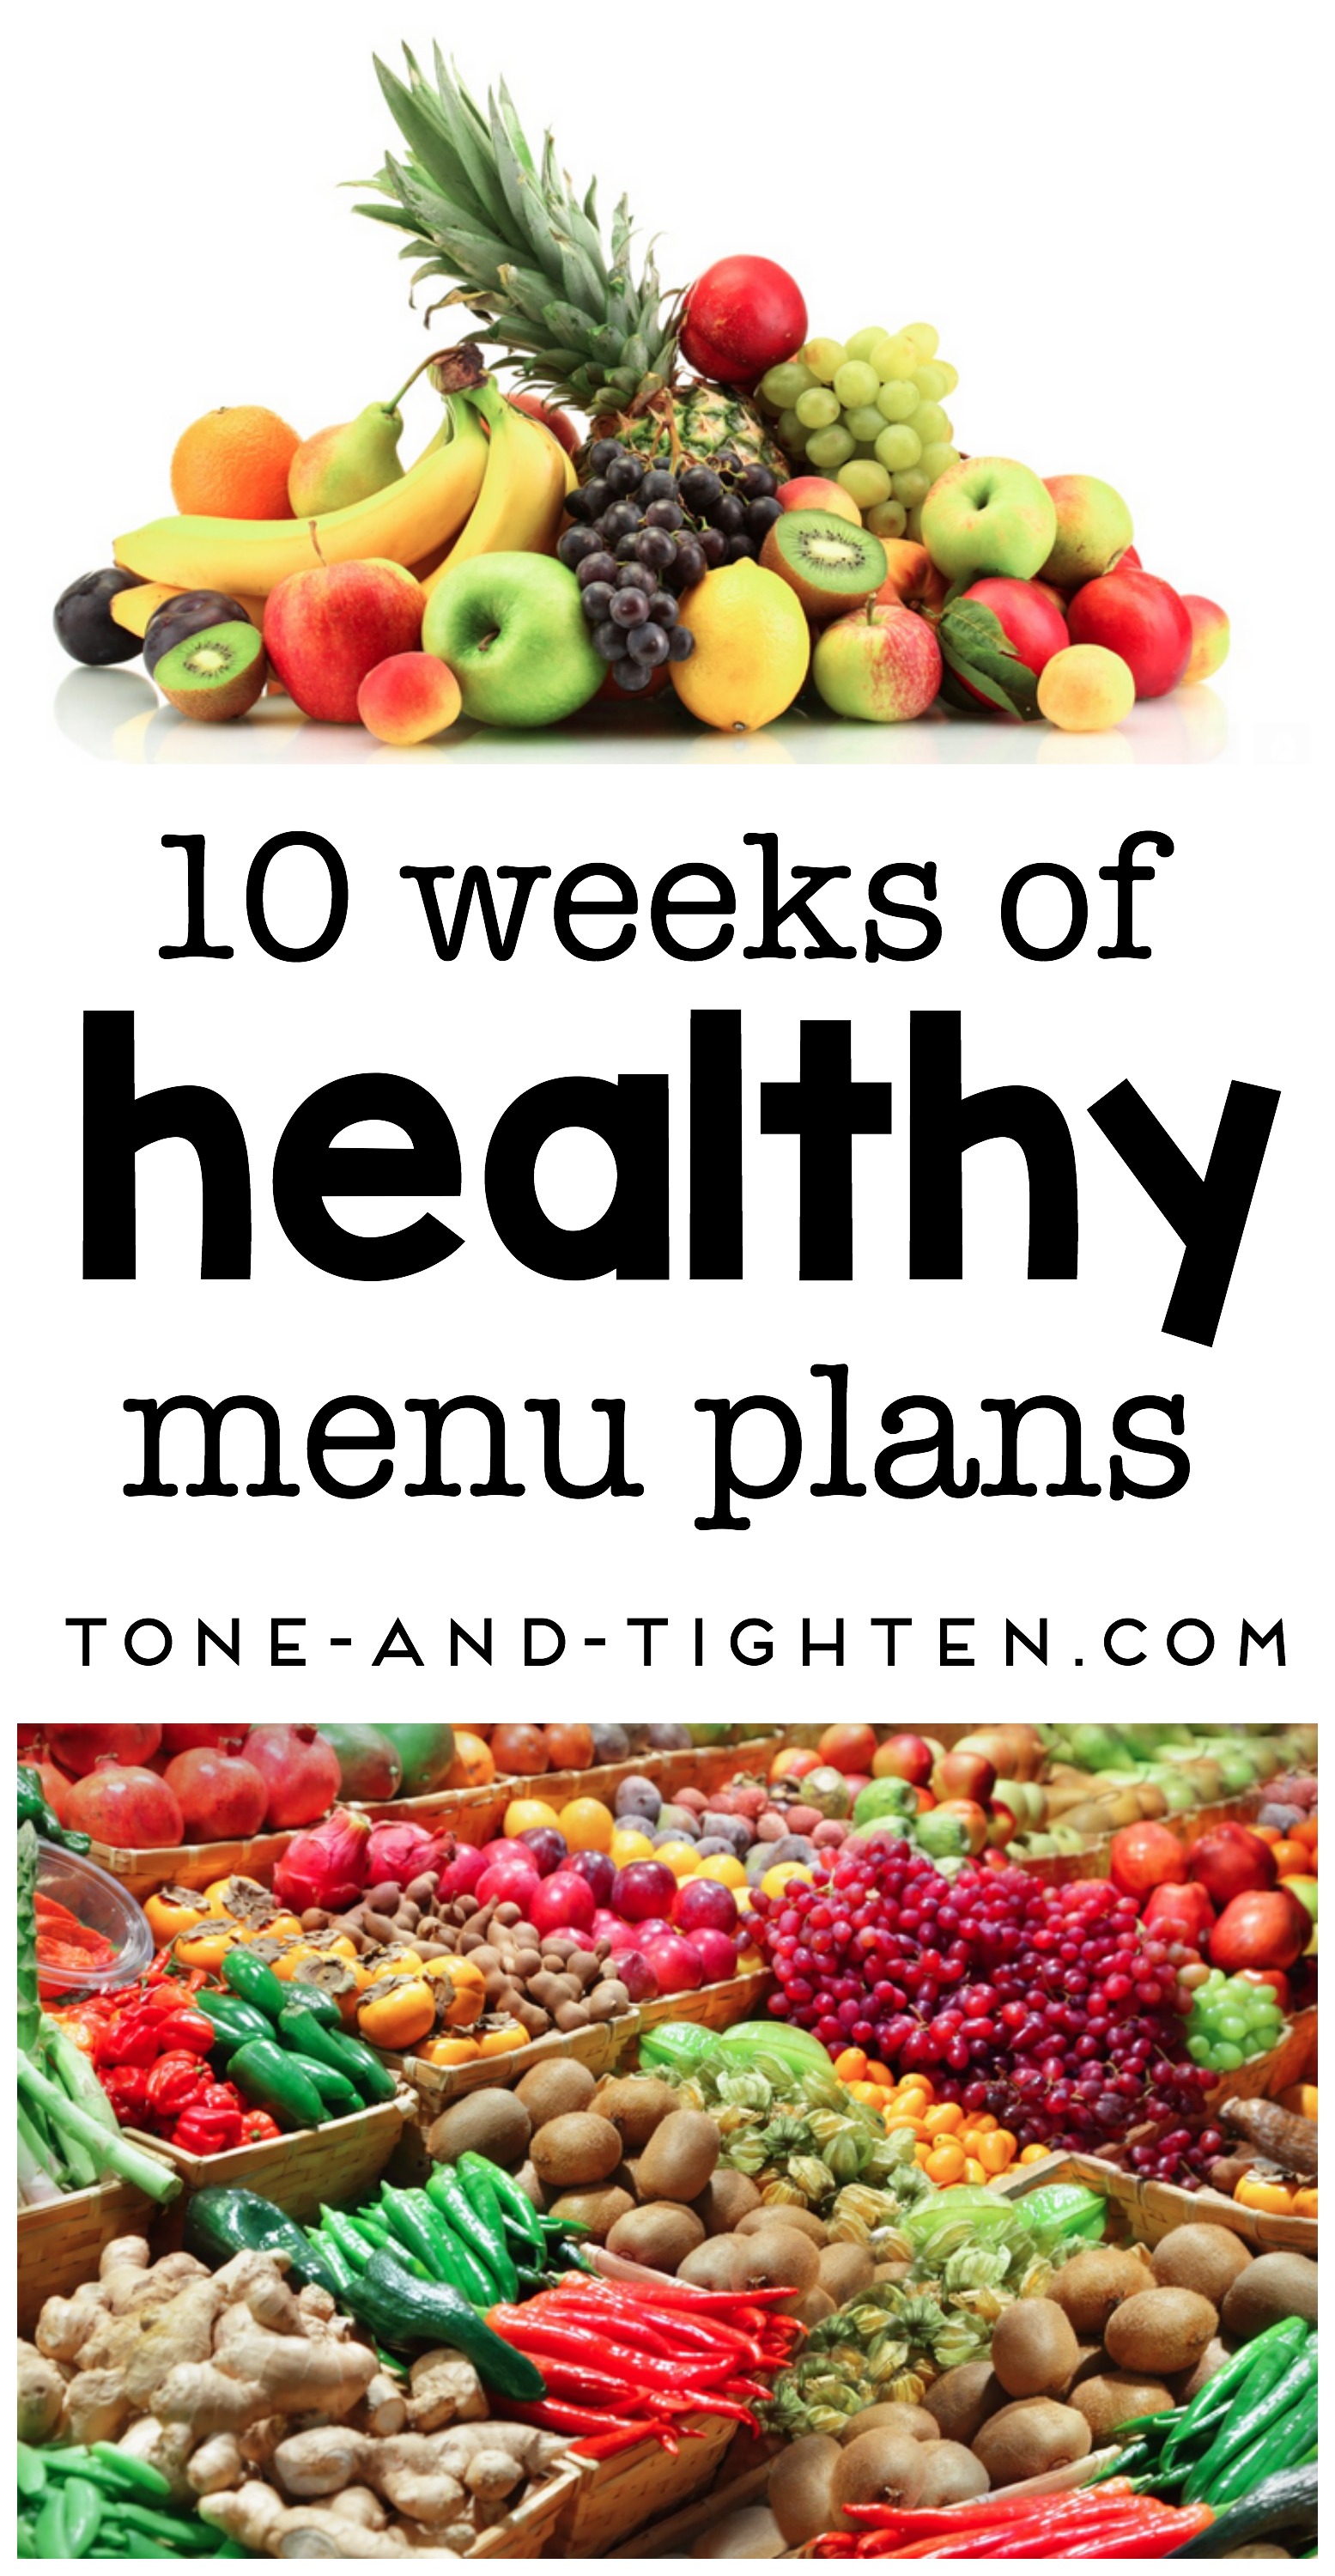 10 weeks of healthy menu plans on Tone-and-Tighten.com